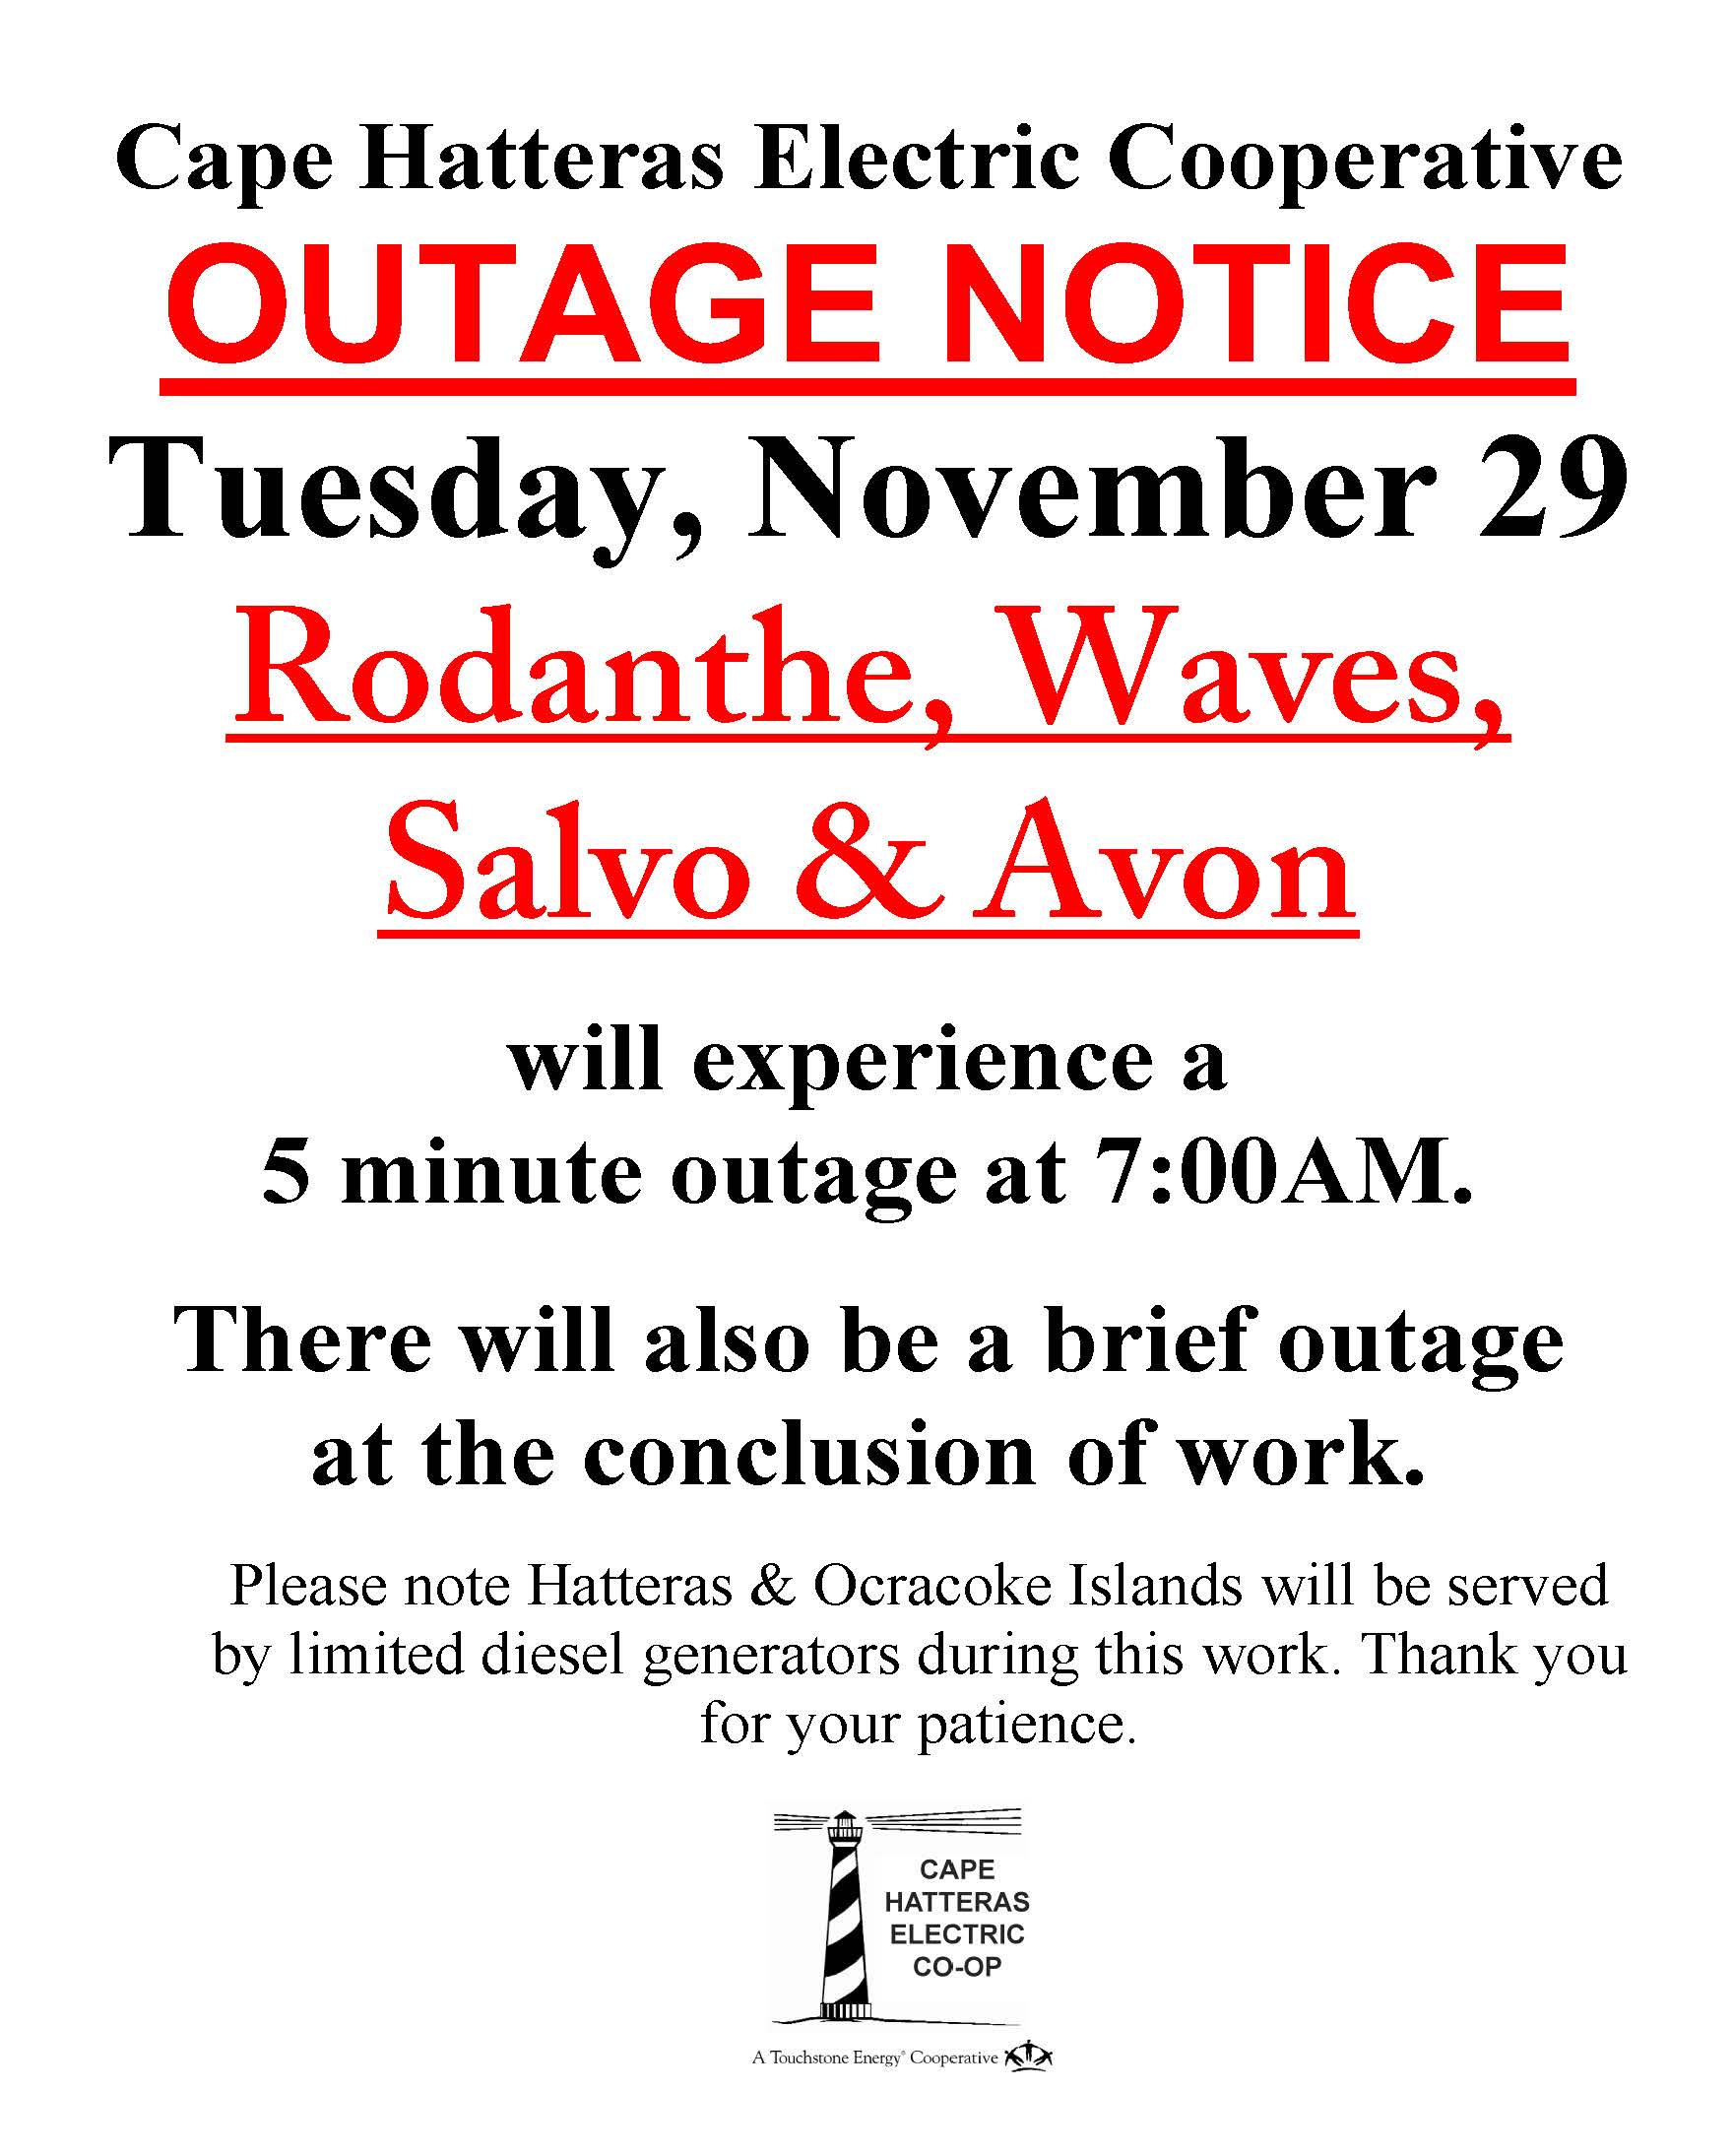 Outage Notice for November 29, Call 800-454-5616 for details